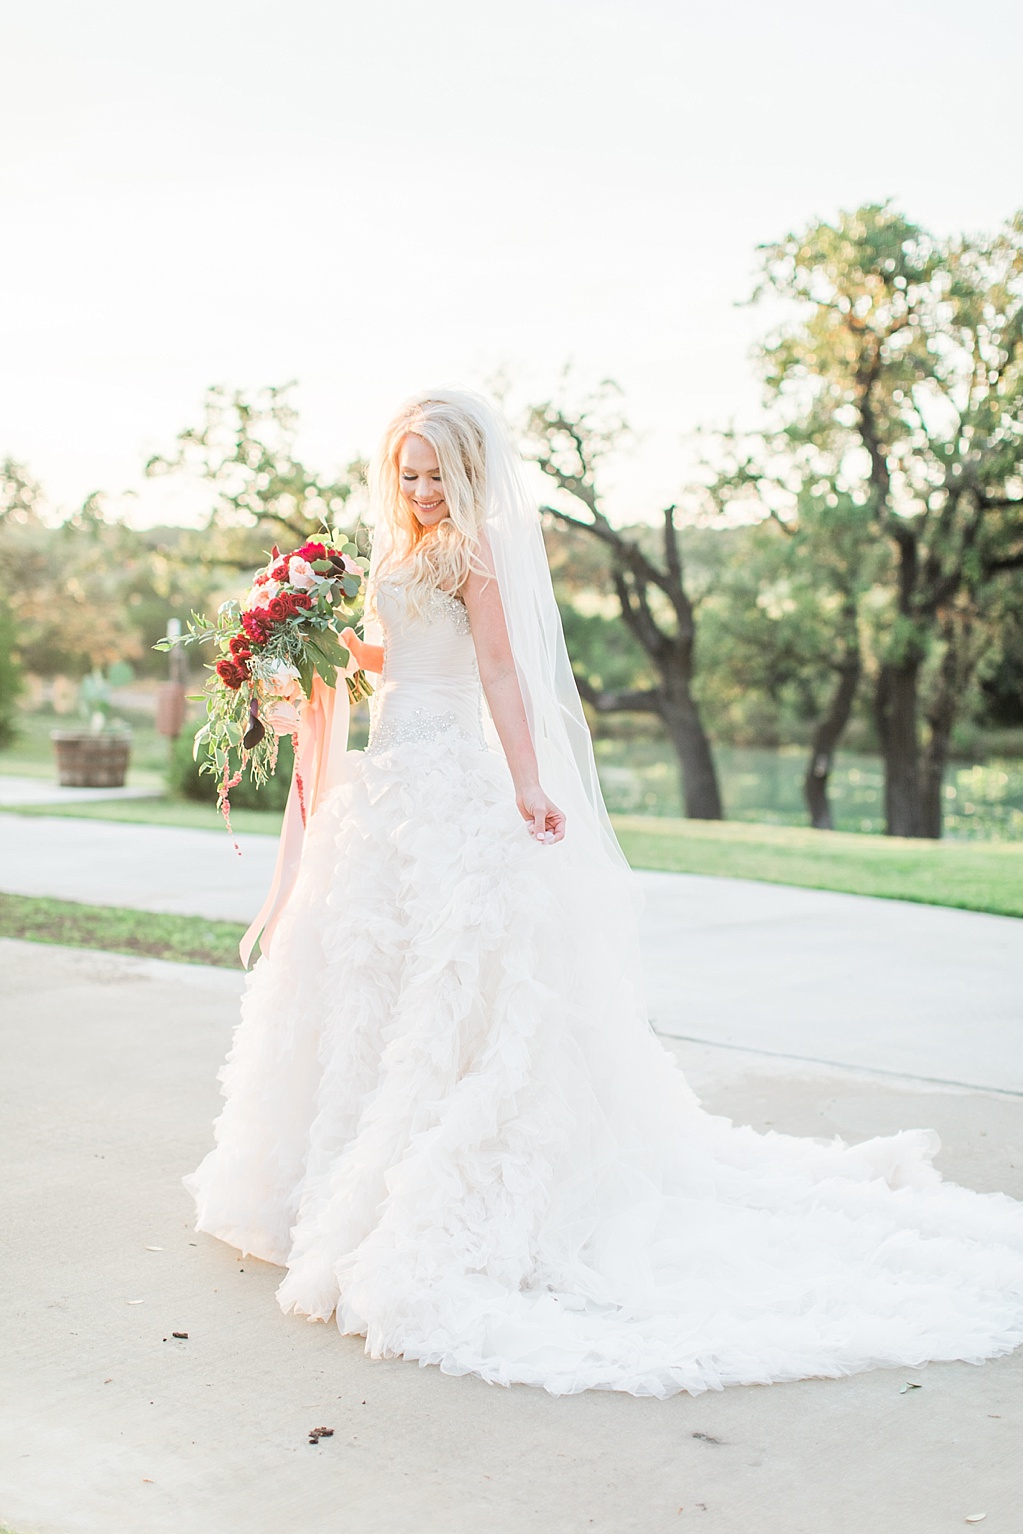 A Classic Bridal Session at Turtle Creek Olive Grove Wedding Venue in Kerrville, Texas 0021